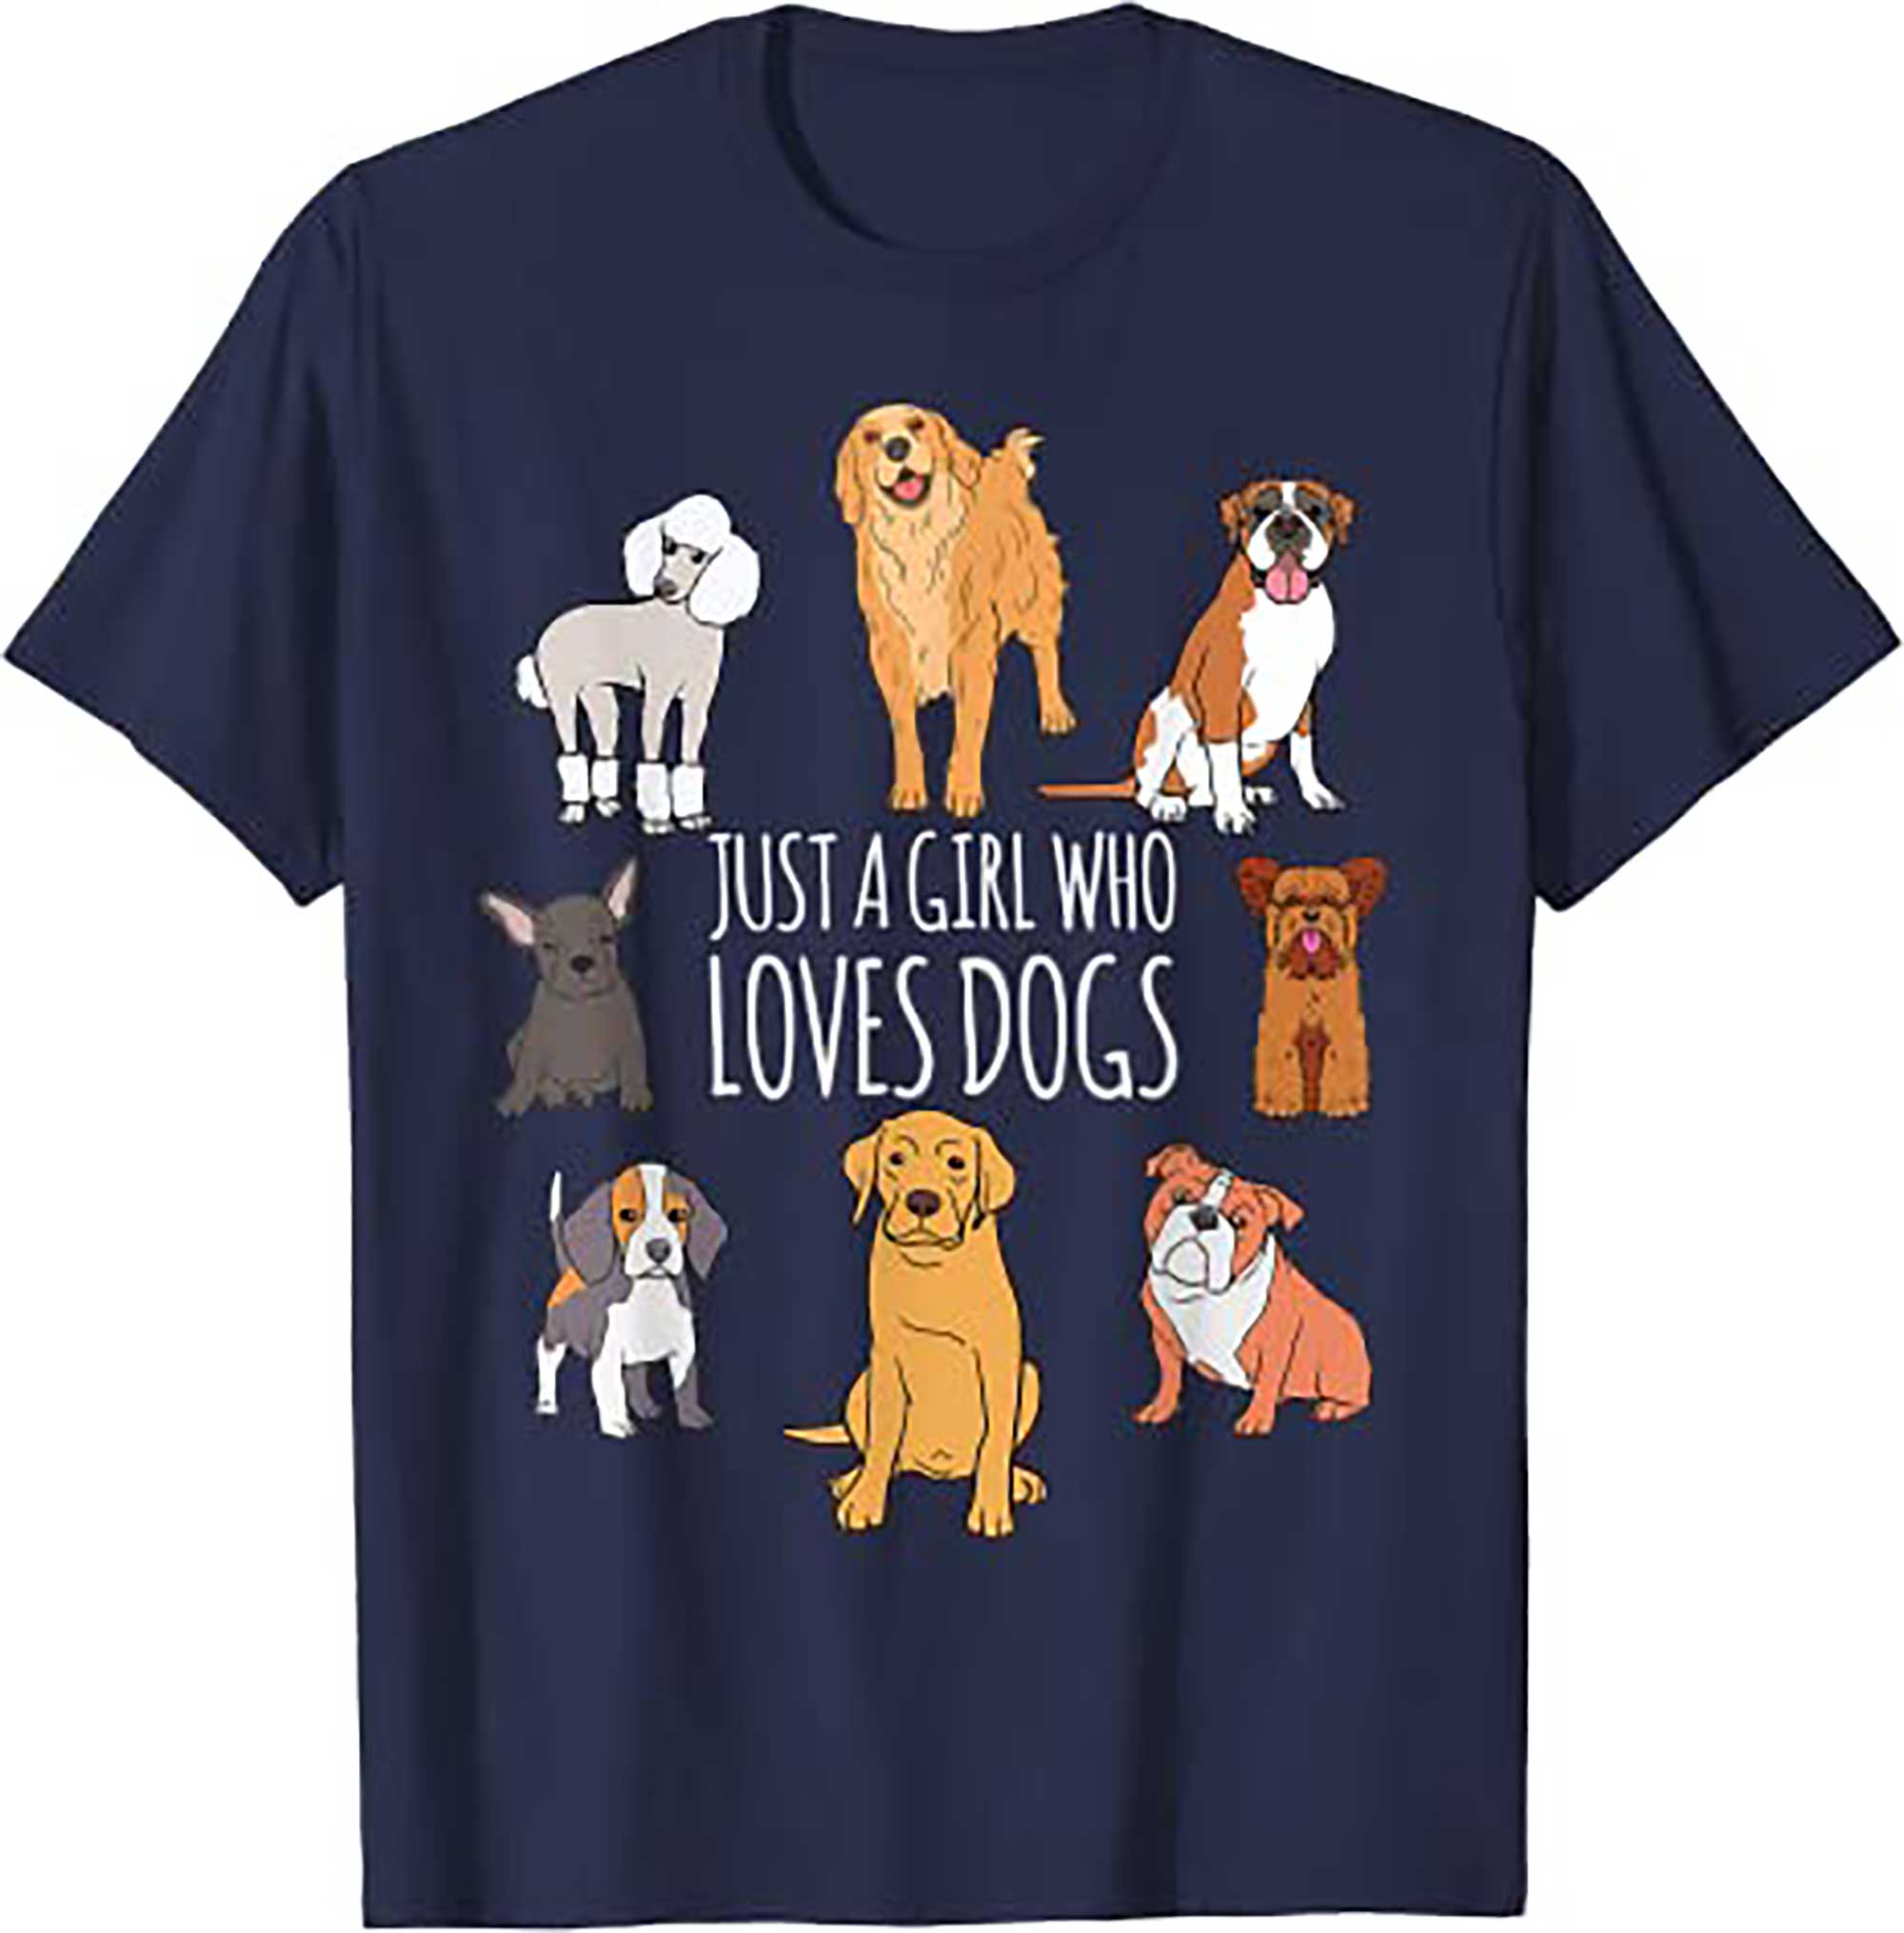 Skitongift Cute Dog Puppy Lover Gift Fun Just A Girl Who Loves Dogs T Shirt 